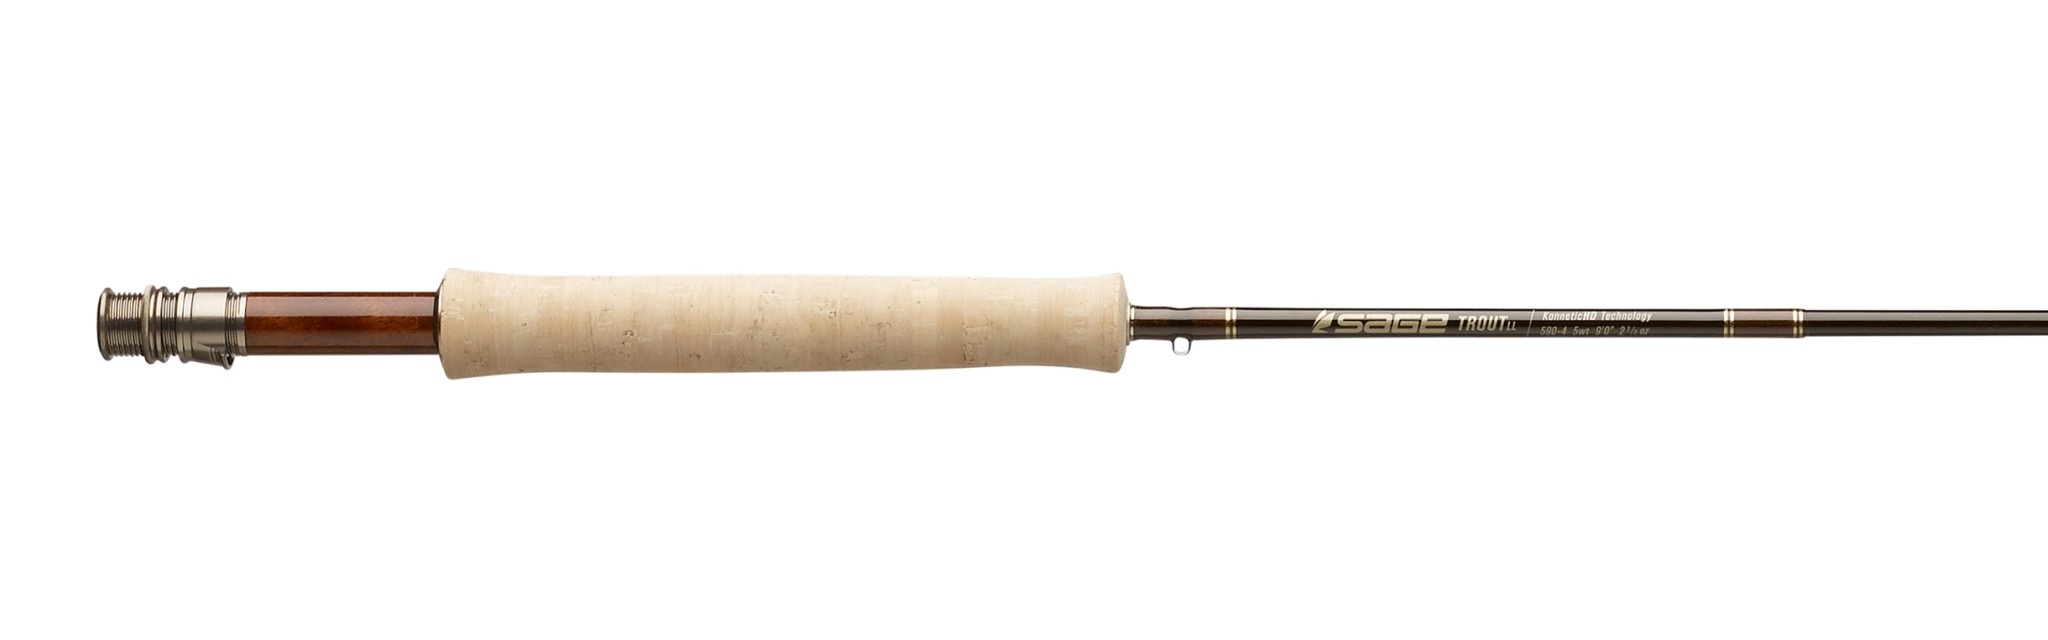 Sage Trout LL Fly Rod 8'9 - 3 weight